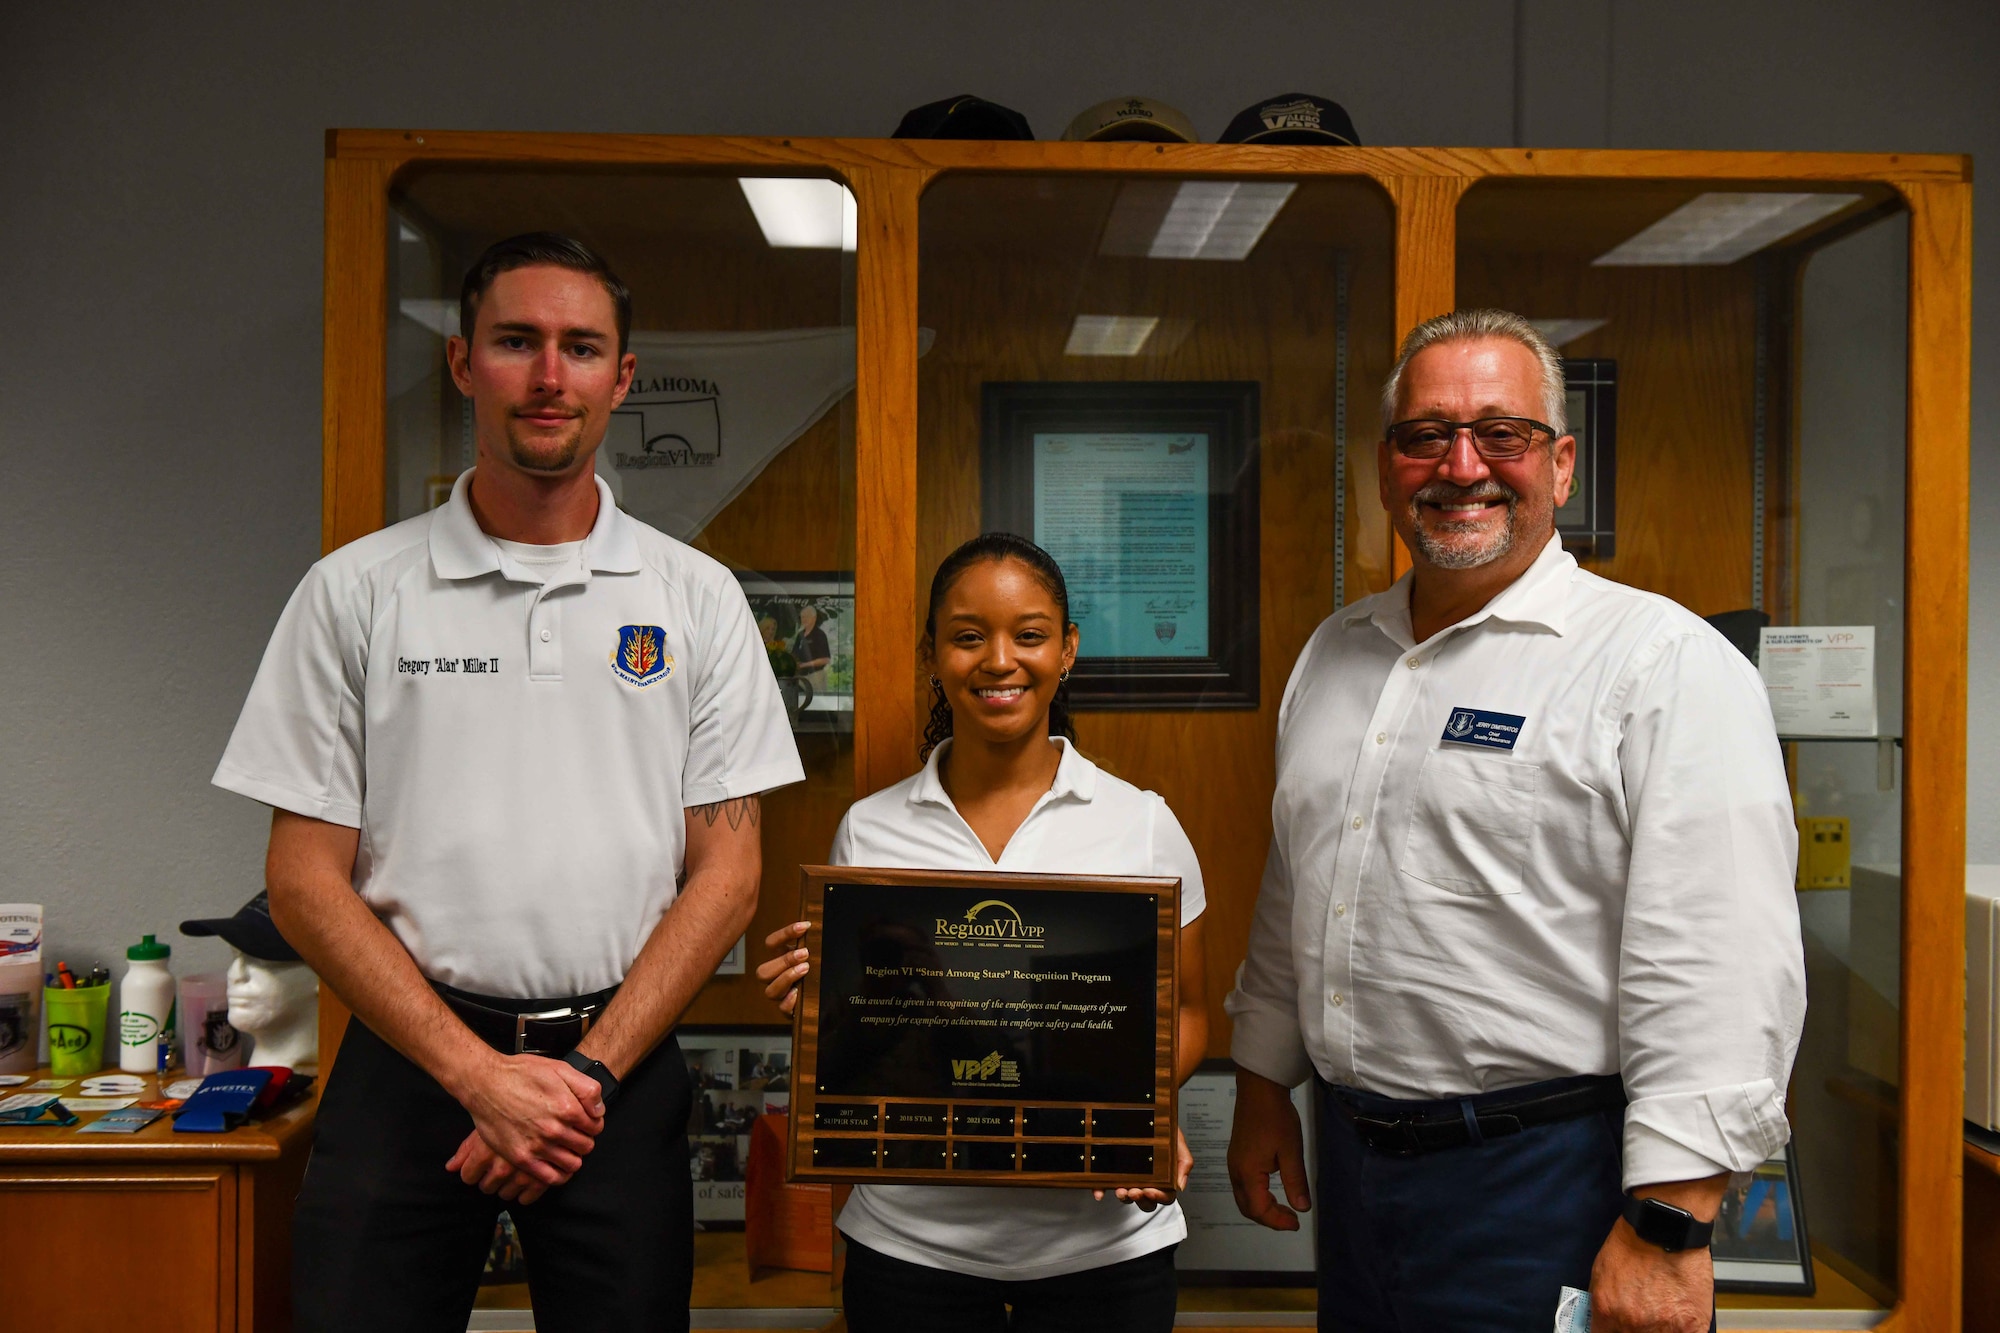 From left, Gregory Miller, Tyra Jones, and Jerry Dimitratos, members of the 97th Maintenance Group (MXG) Voluntary Protection Program team, show off the Star Among Stars award at Altus Air Force Base, Oklahoma, September 13, 2022. The 97th Air Mobility Wing MXG previously won the award in 2015, 2016, 2017, and 2018. (U.S. Air Force photo by Airman 1st Class Kari Degraffenreed)